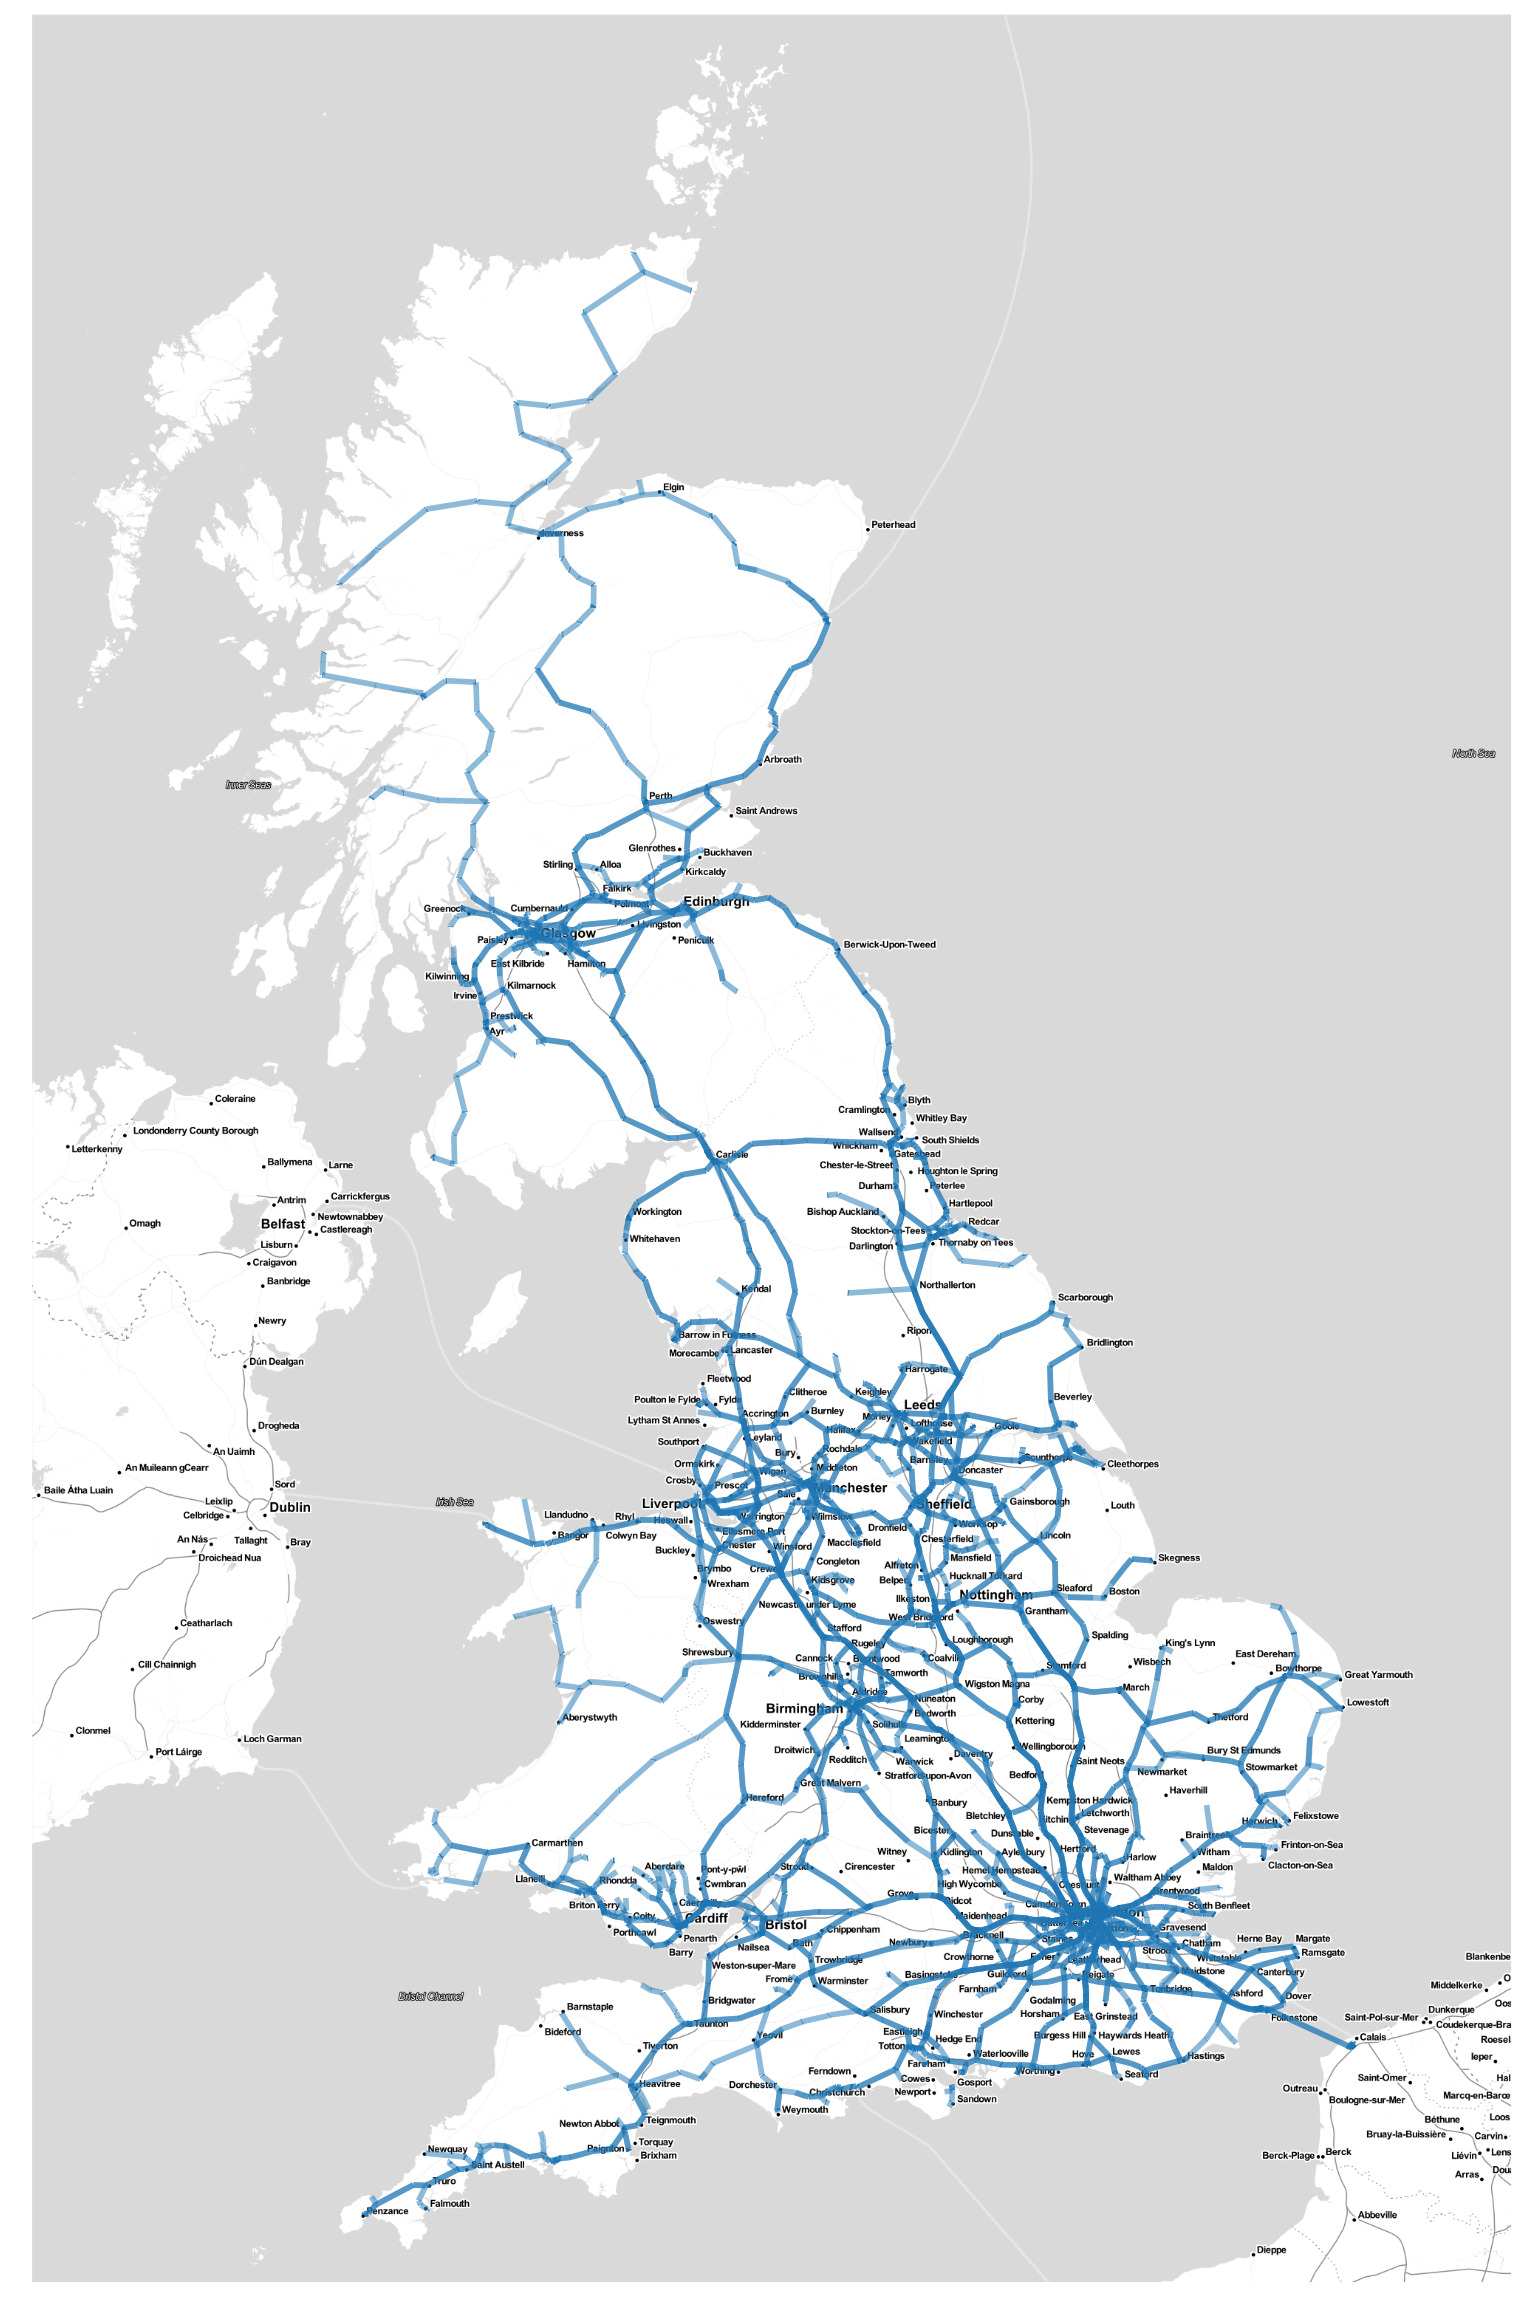 Segments of the railway network on map of Great Britain.